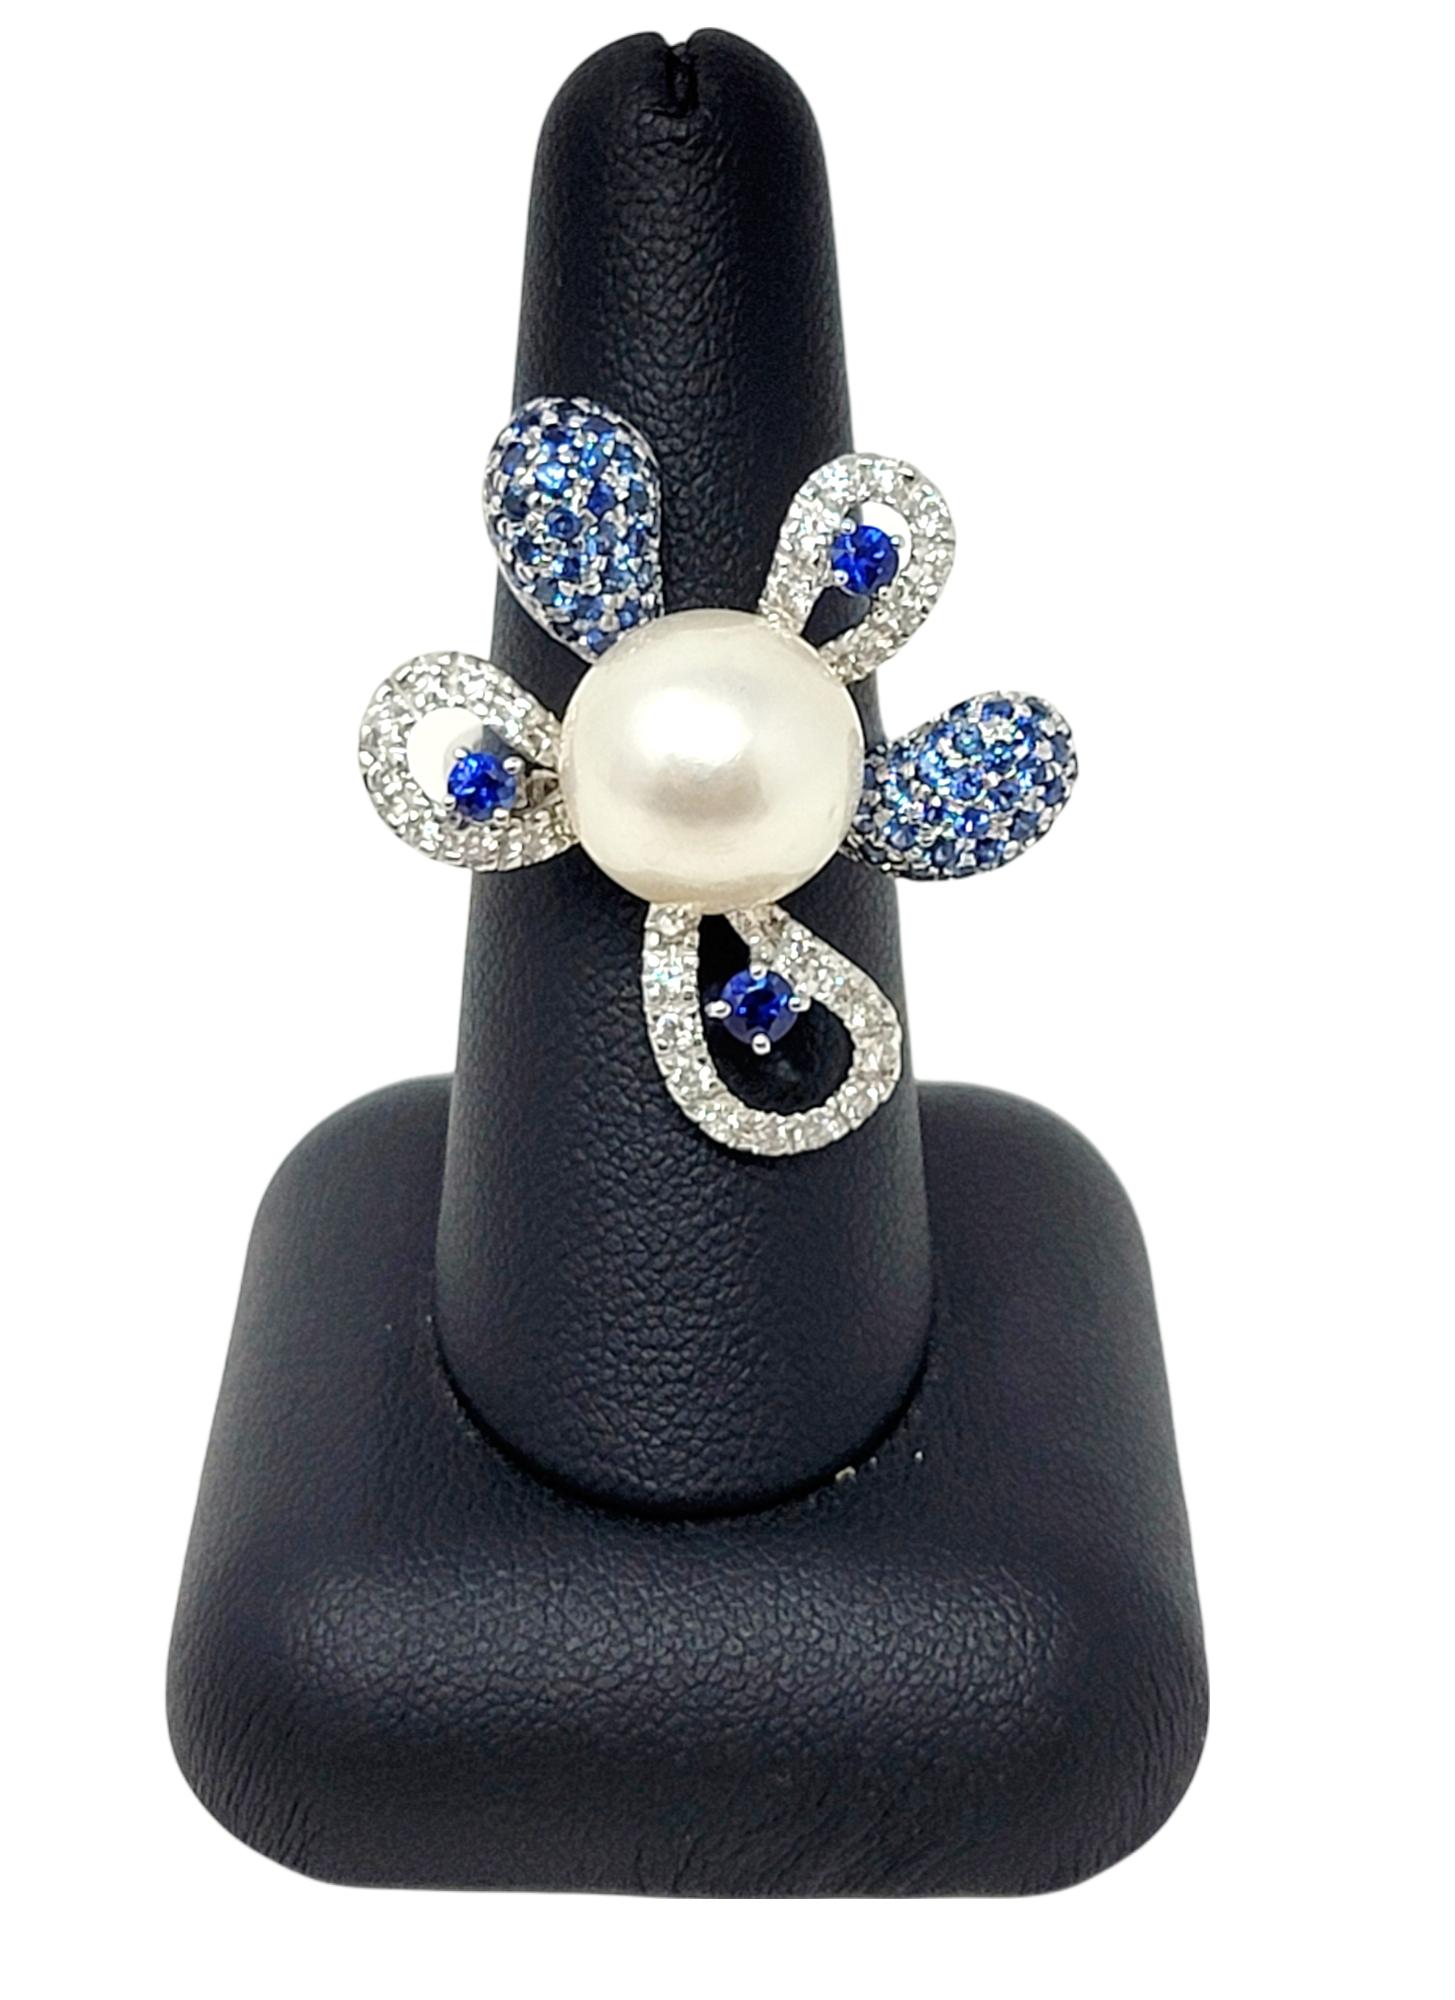 South Sea Cultured Pearl Flower Cocktail Ring with Diamond and Sapphire Petals For Sale 5